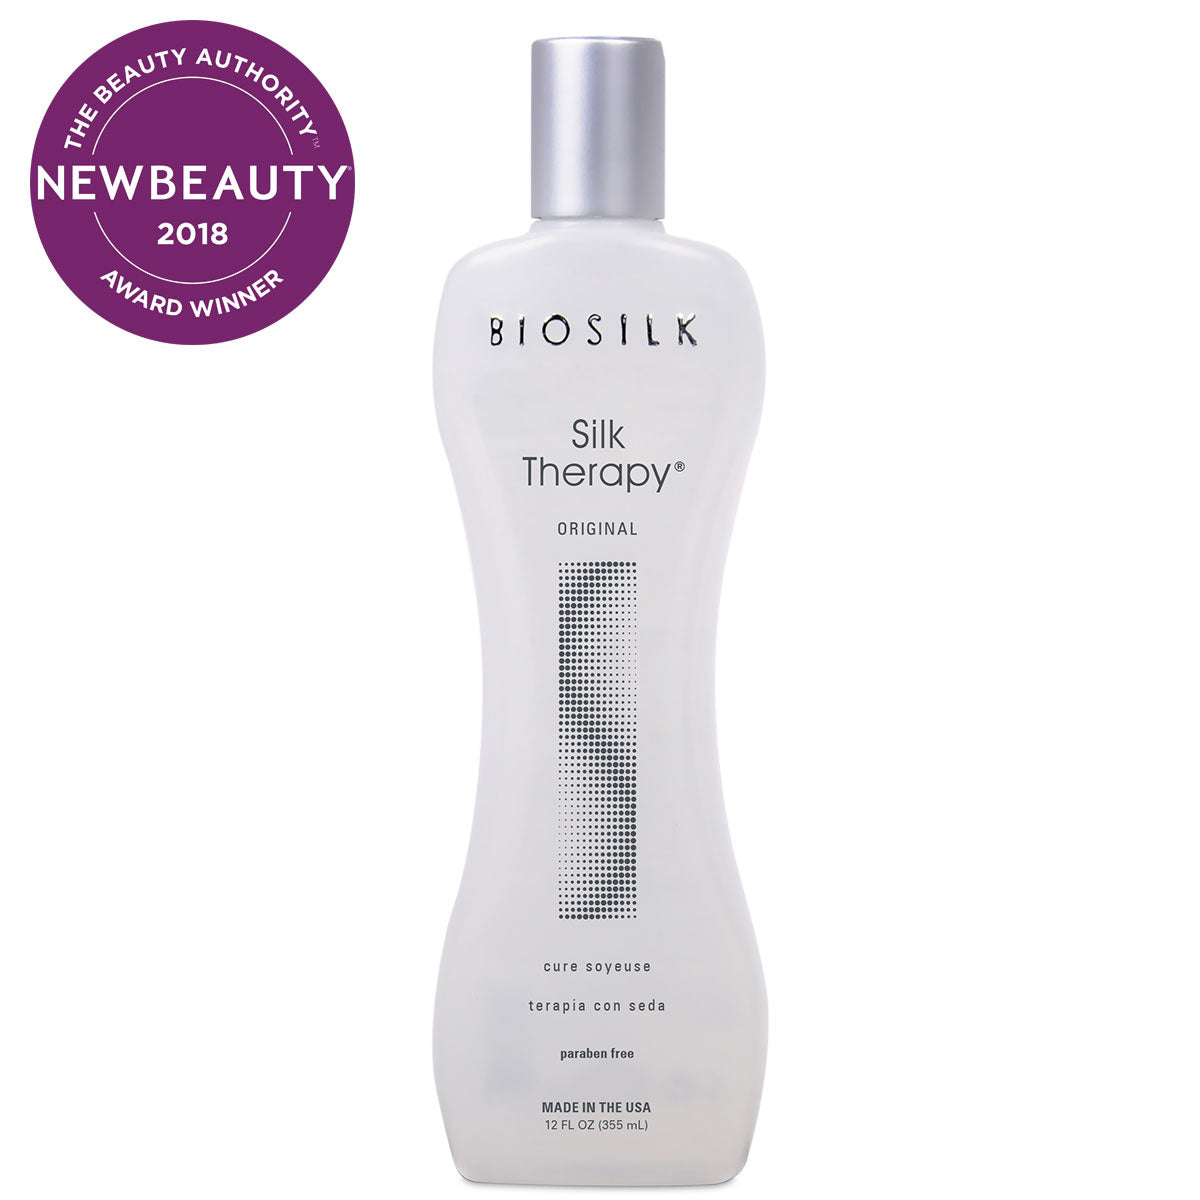 BioSilk Silk Therapy Original is a weightless leave-in silk replenishing and reconstructing treatment that helps repair, smooth and protect all hair types.